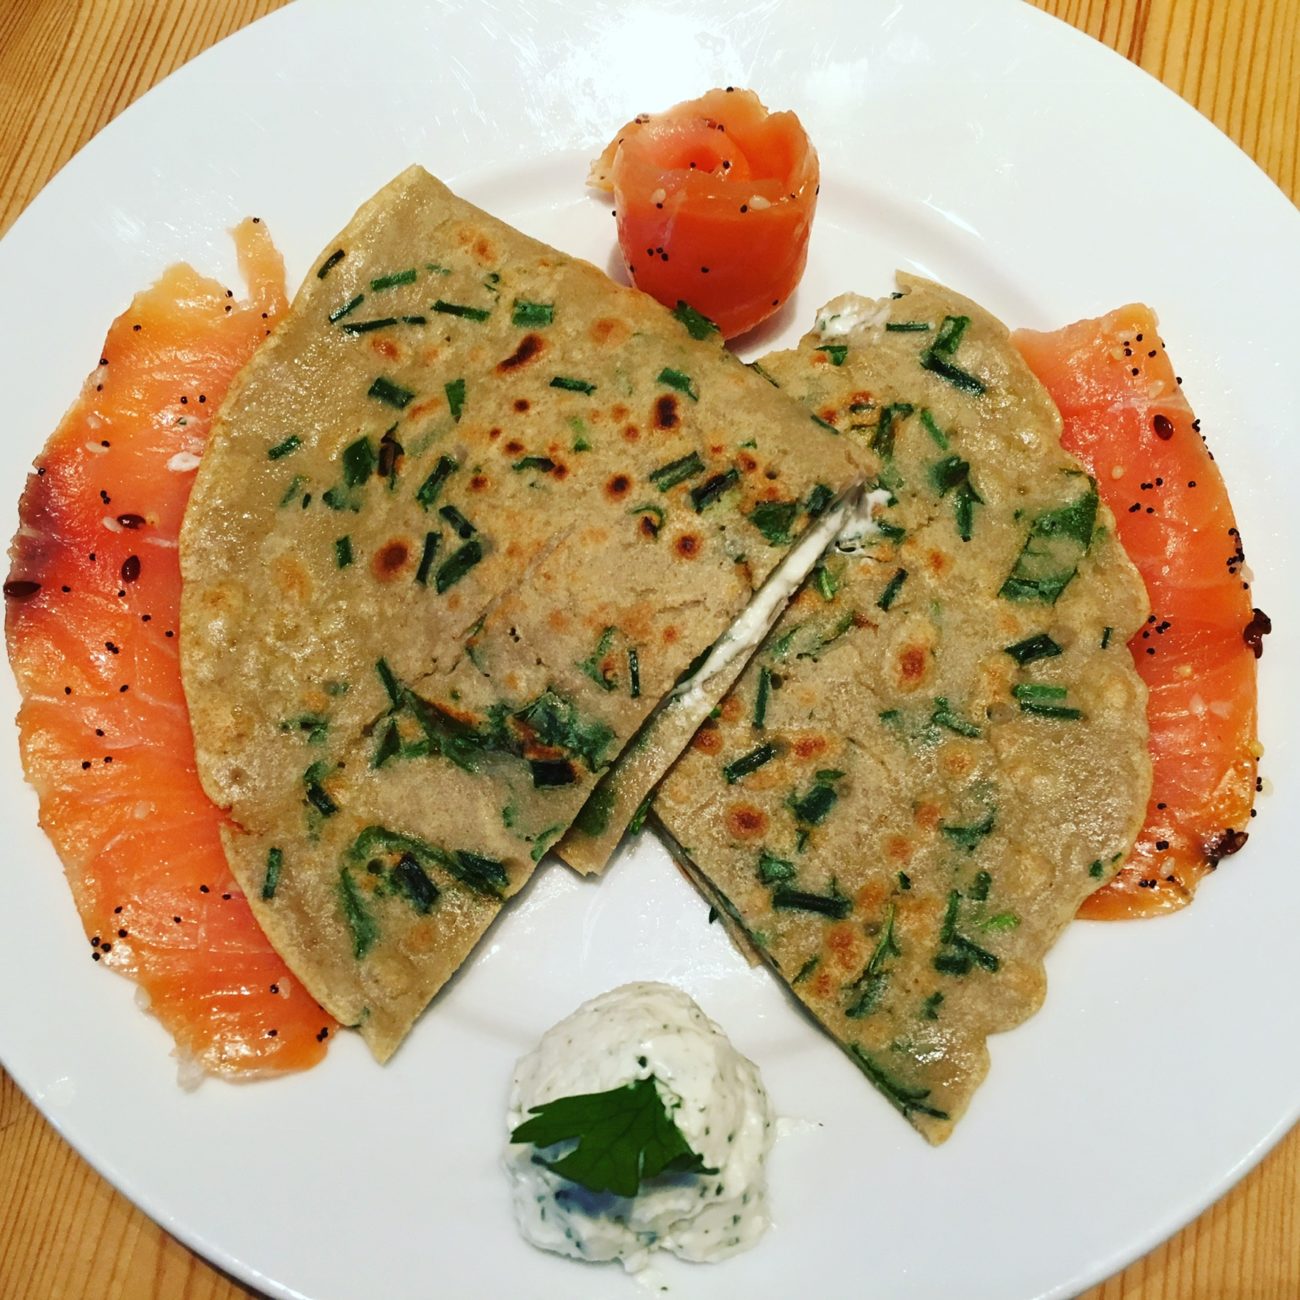 Herb buckwheat galette with smoked salmon